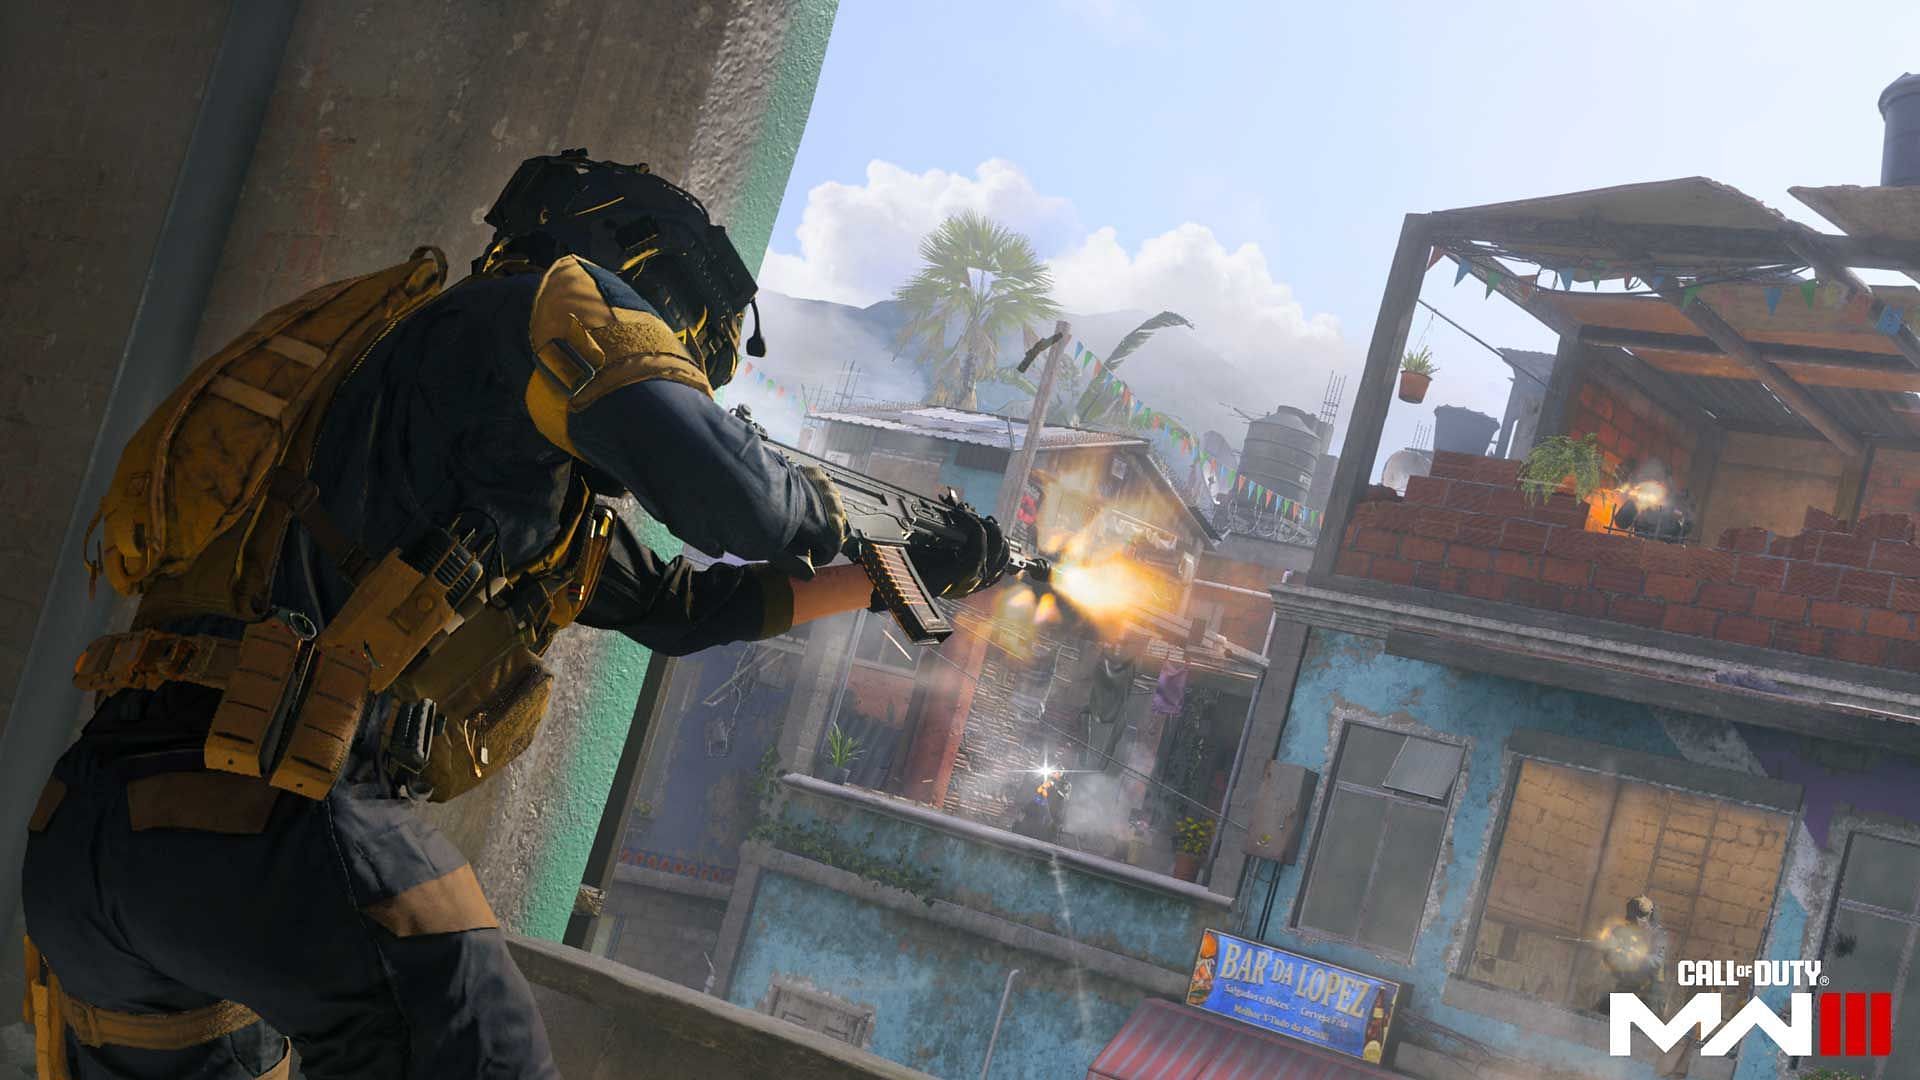 Call Of Duty: Modern Warfare 3 beta dates, download size, and how